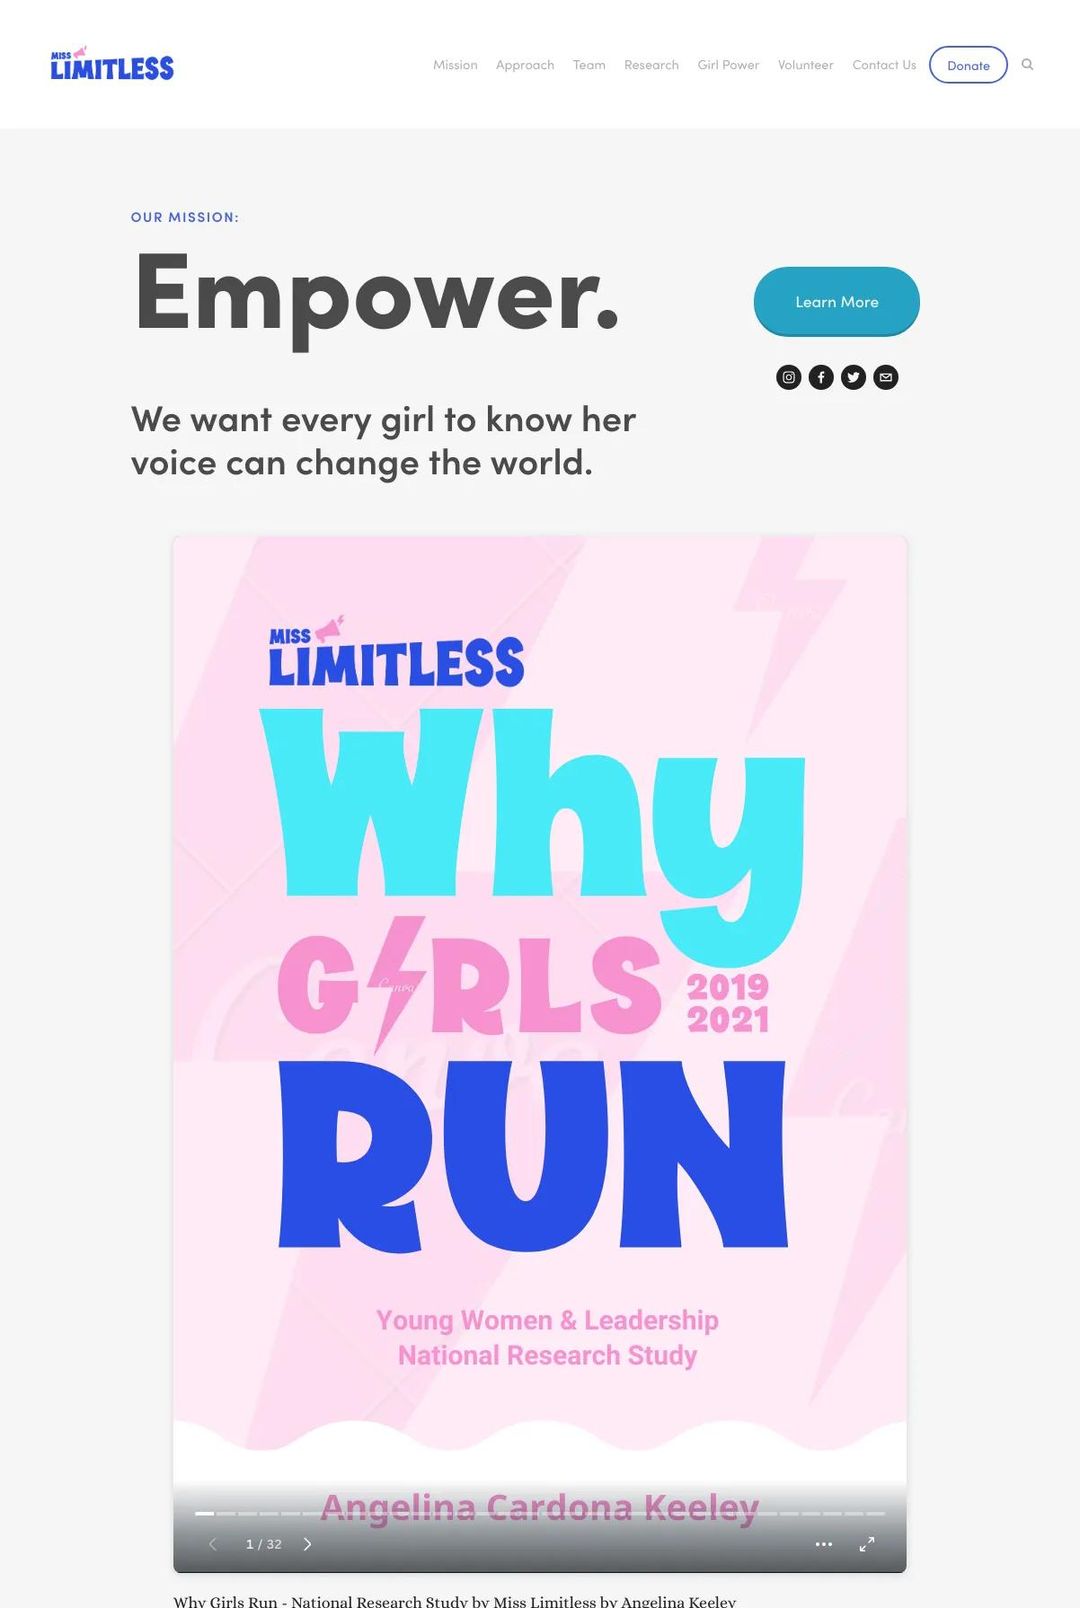 Screenshot 1 of Miss Limitless (Example Squarespace Nonprofit Website)